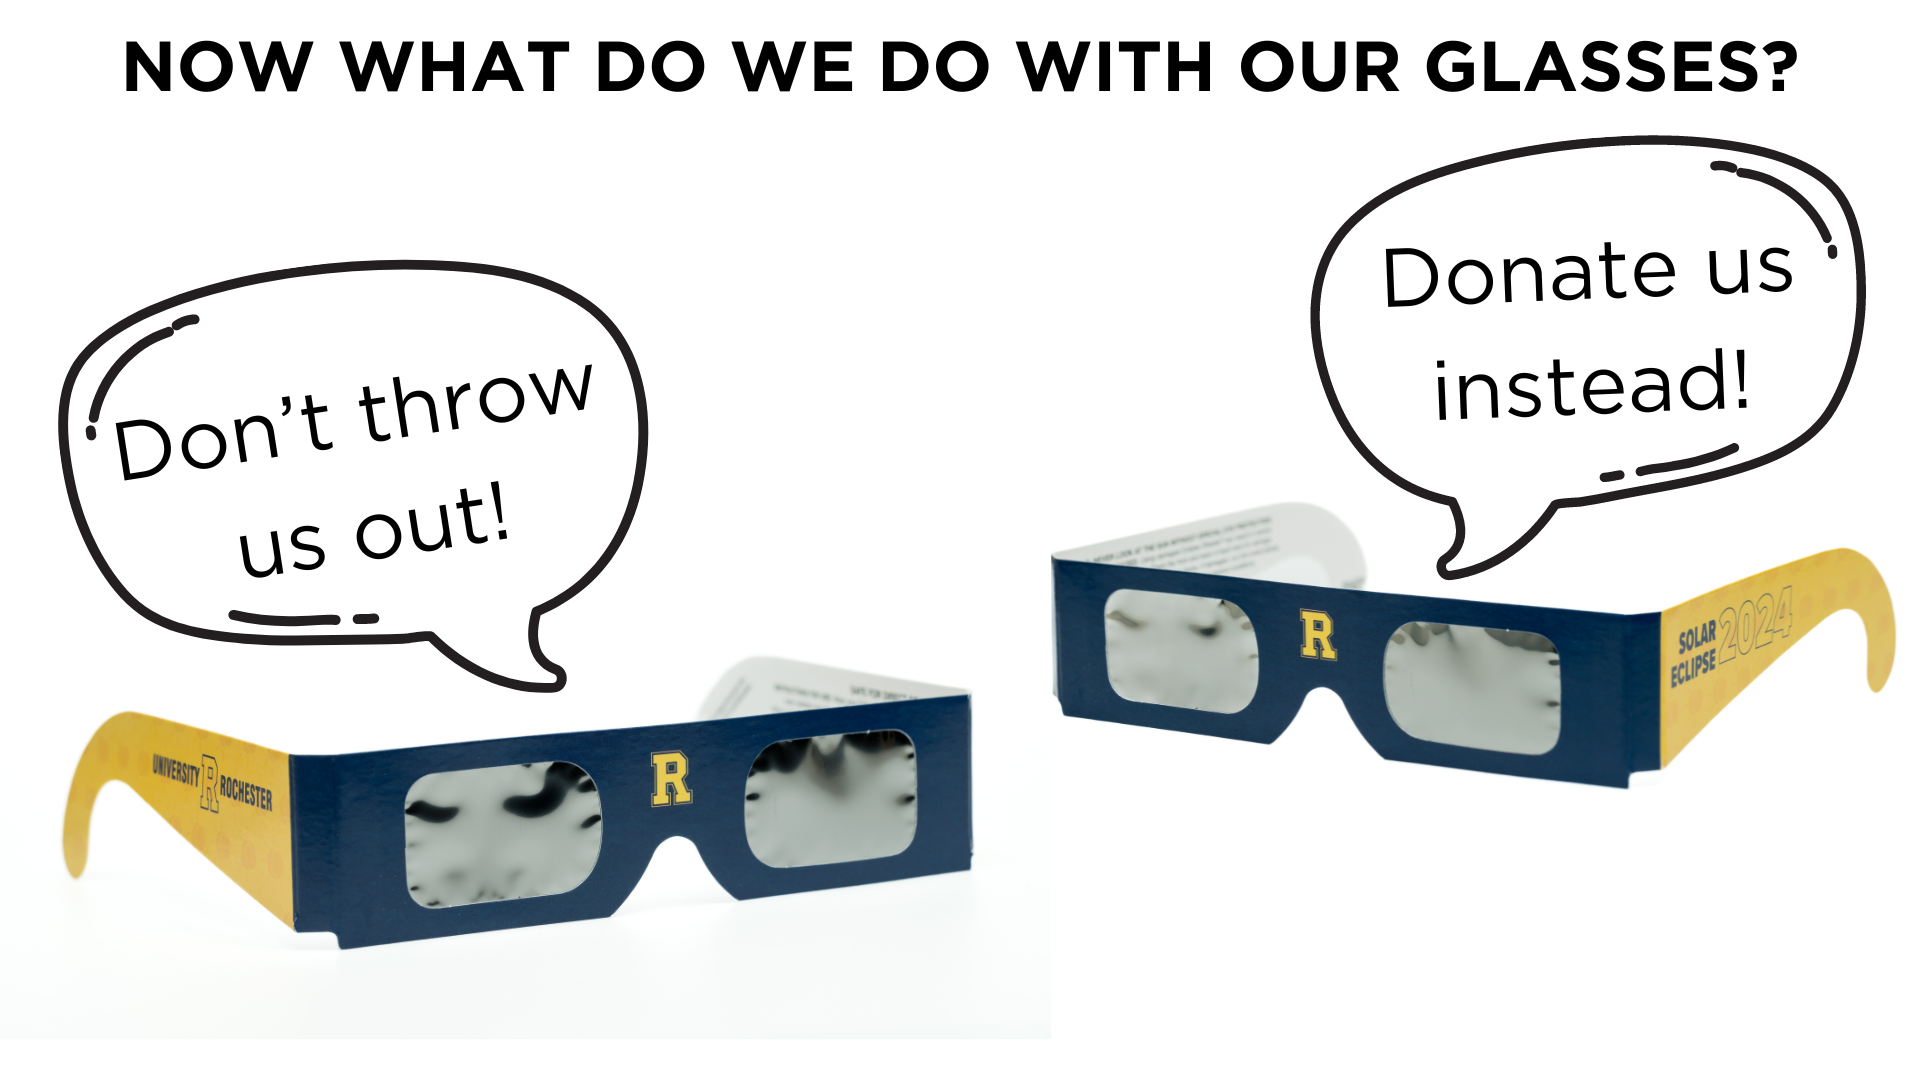 image of two eclipse glasses with talking bubbles that say "dont throw us out" and "donate us instead"